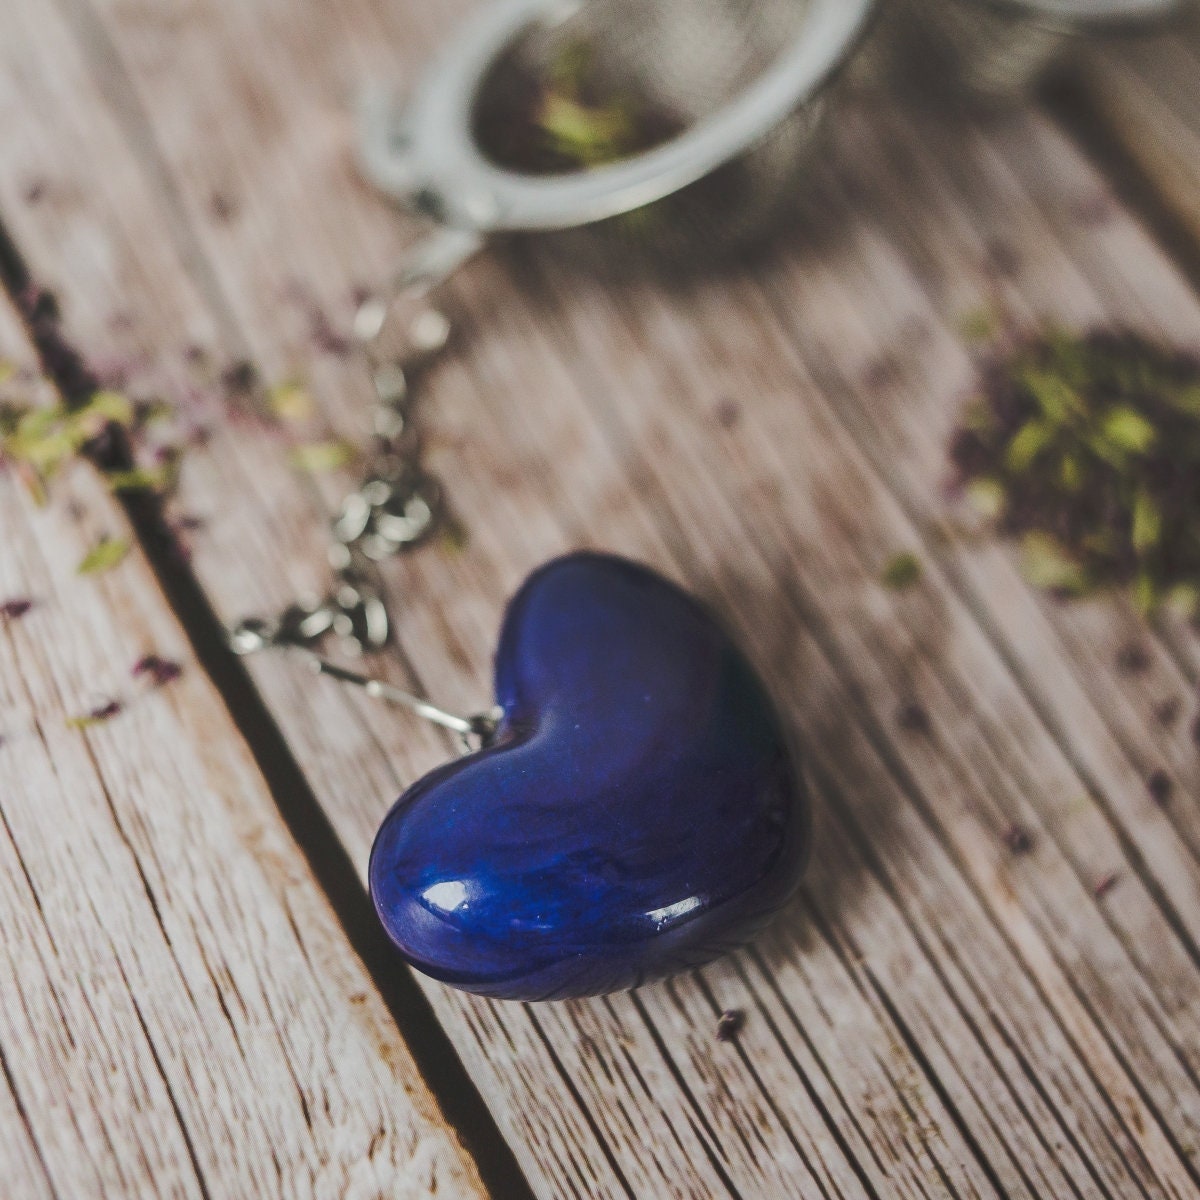 Loose leaf tea infuser with blue heart - Loose tea strainer with ceramic heart - Herbal tea ball infuser with charm